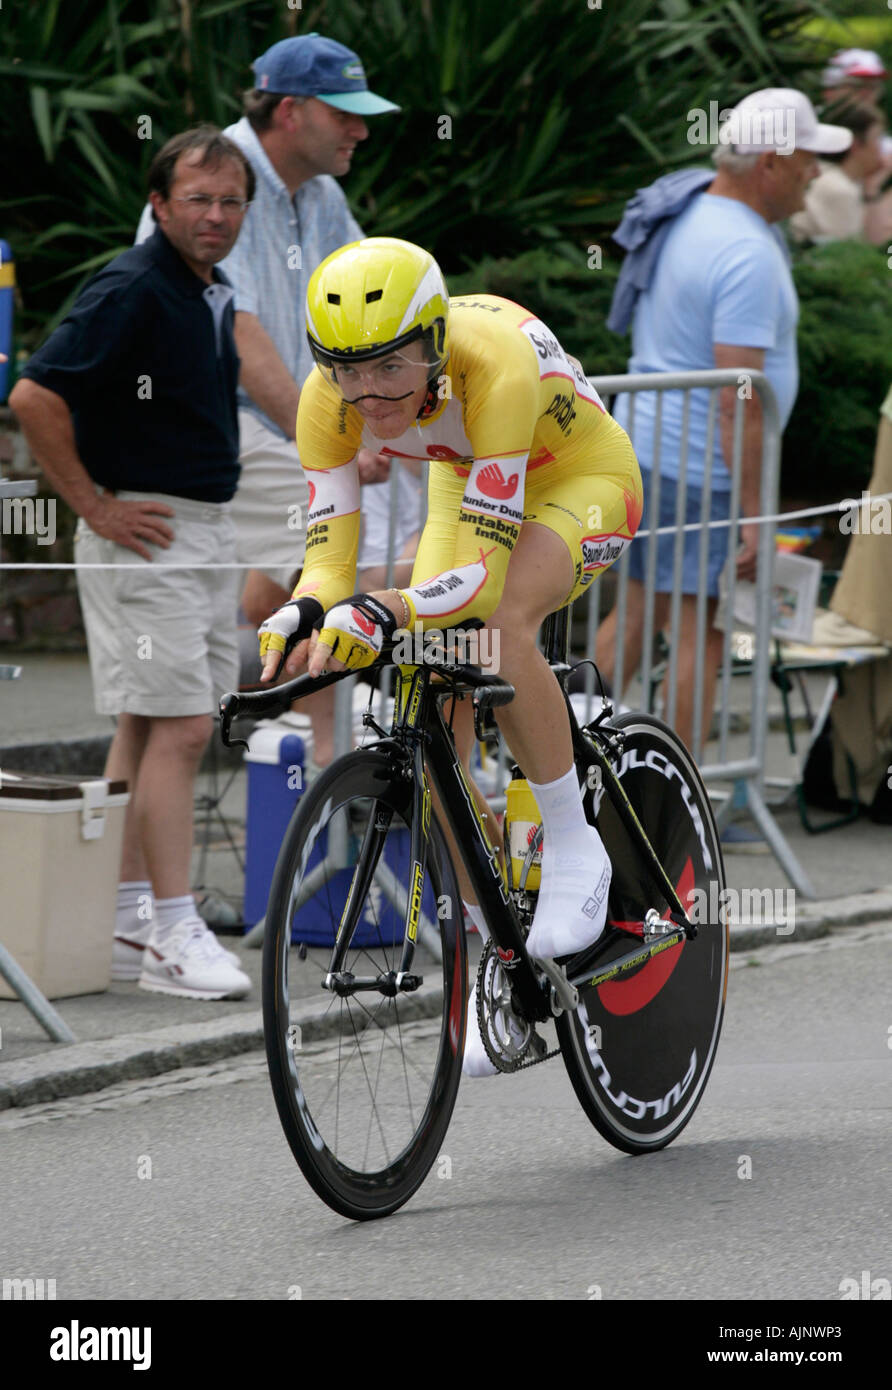 Il leader del tour de France in giallo yersey maillot jaune singoli time trial bike ciclo cycle race 2006 Rennes Foto Stock